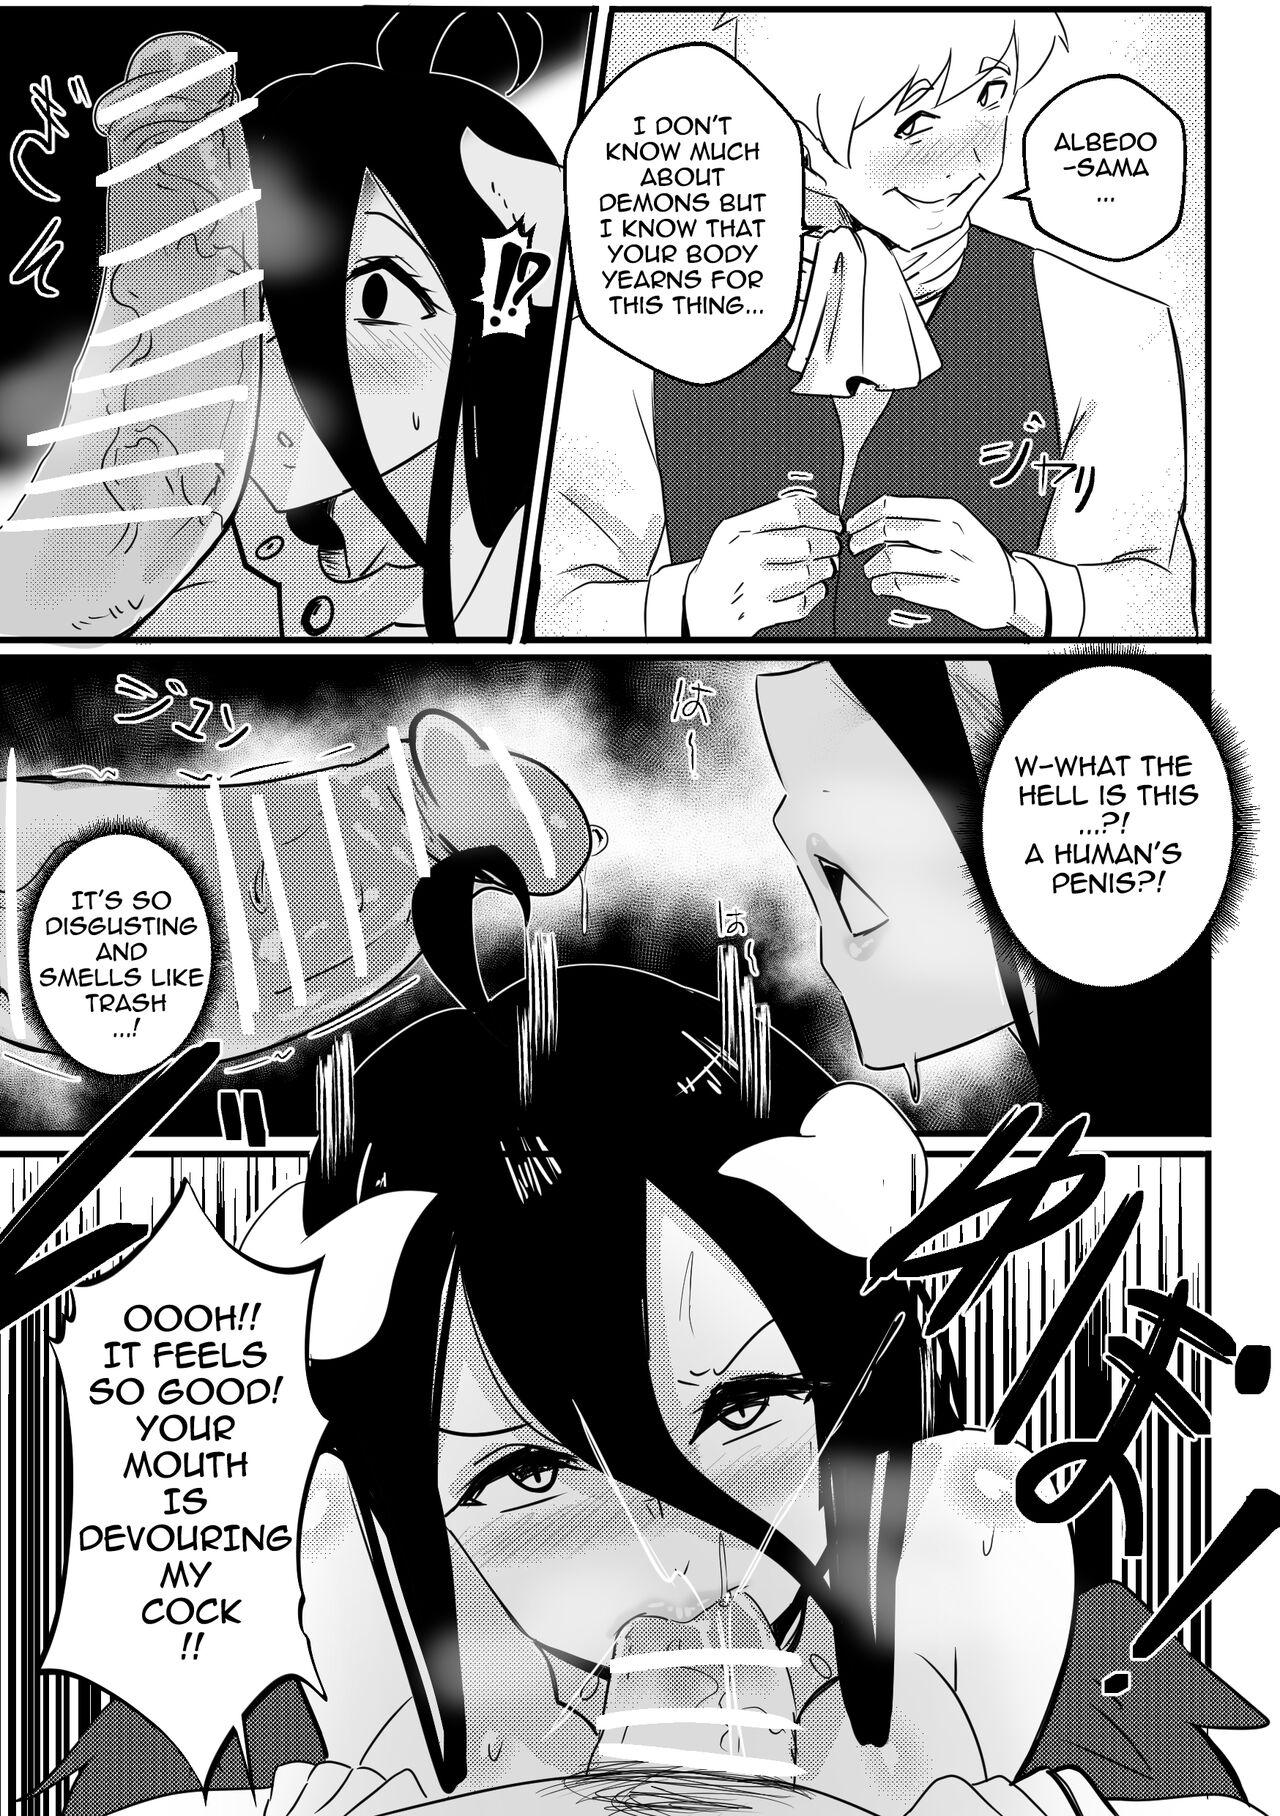 Stepbrother [Merkonig] B-Trayal 40 Albedo (Overlord) Censored [English] - Overlord Blowing - Page 6